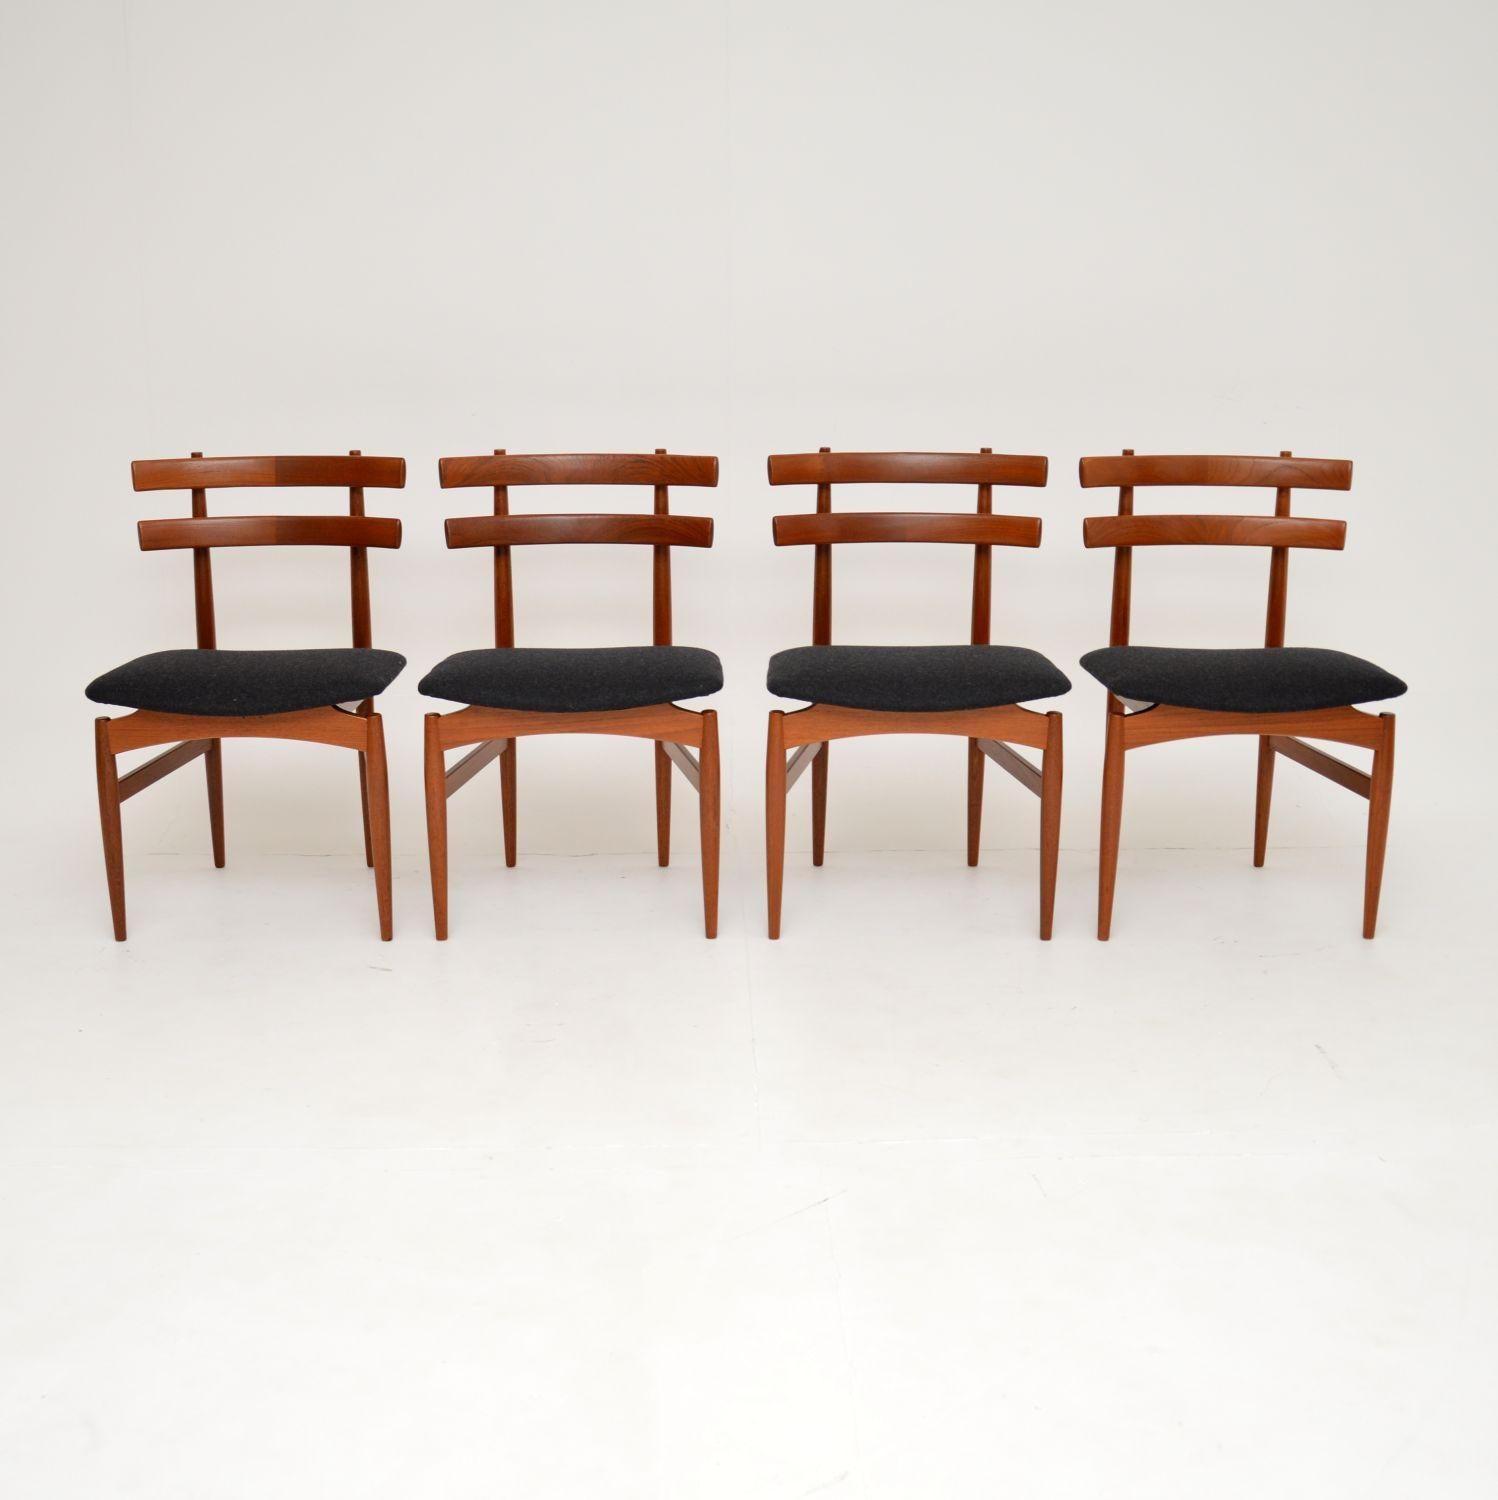 A beautiful and sculptural set of four Danish vintage teak dining chairs, designed by Poul Hundevad for Vamdrup. They were made in Denmark, and date from the 1960’s.

The quality is amazing, with an incredibly crafted and unique design. The curved